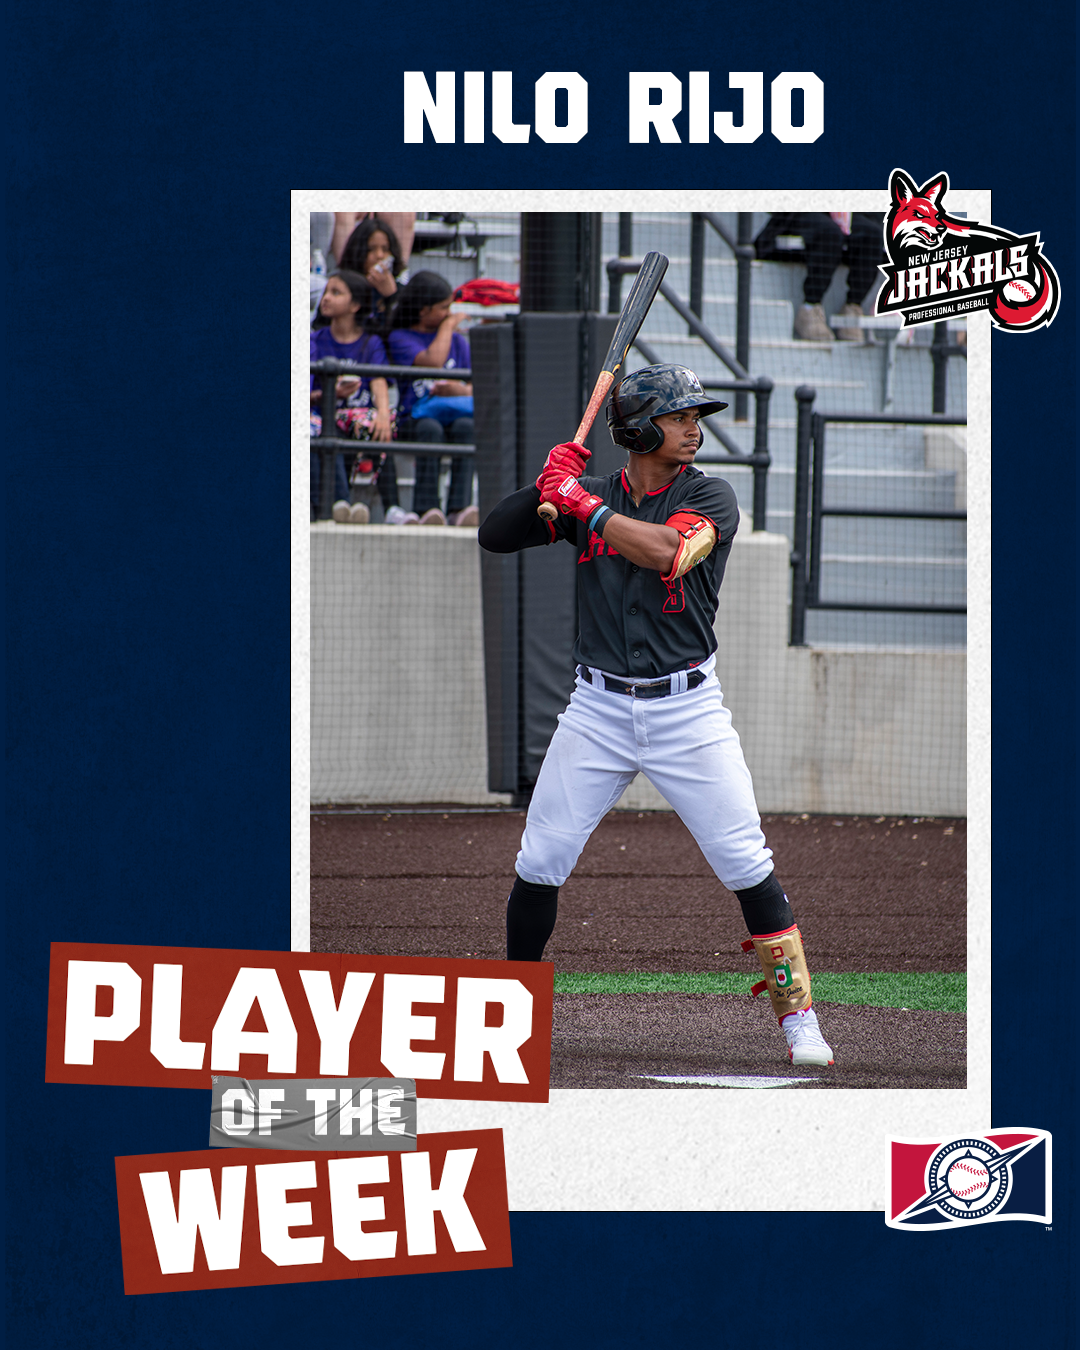 NILO RIJO WINS PLAYER OF THE WEEK!